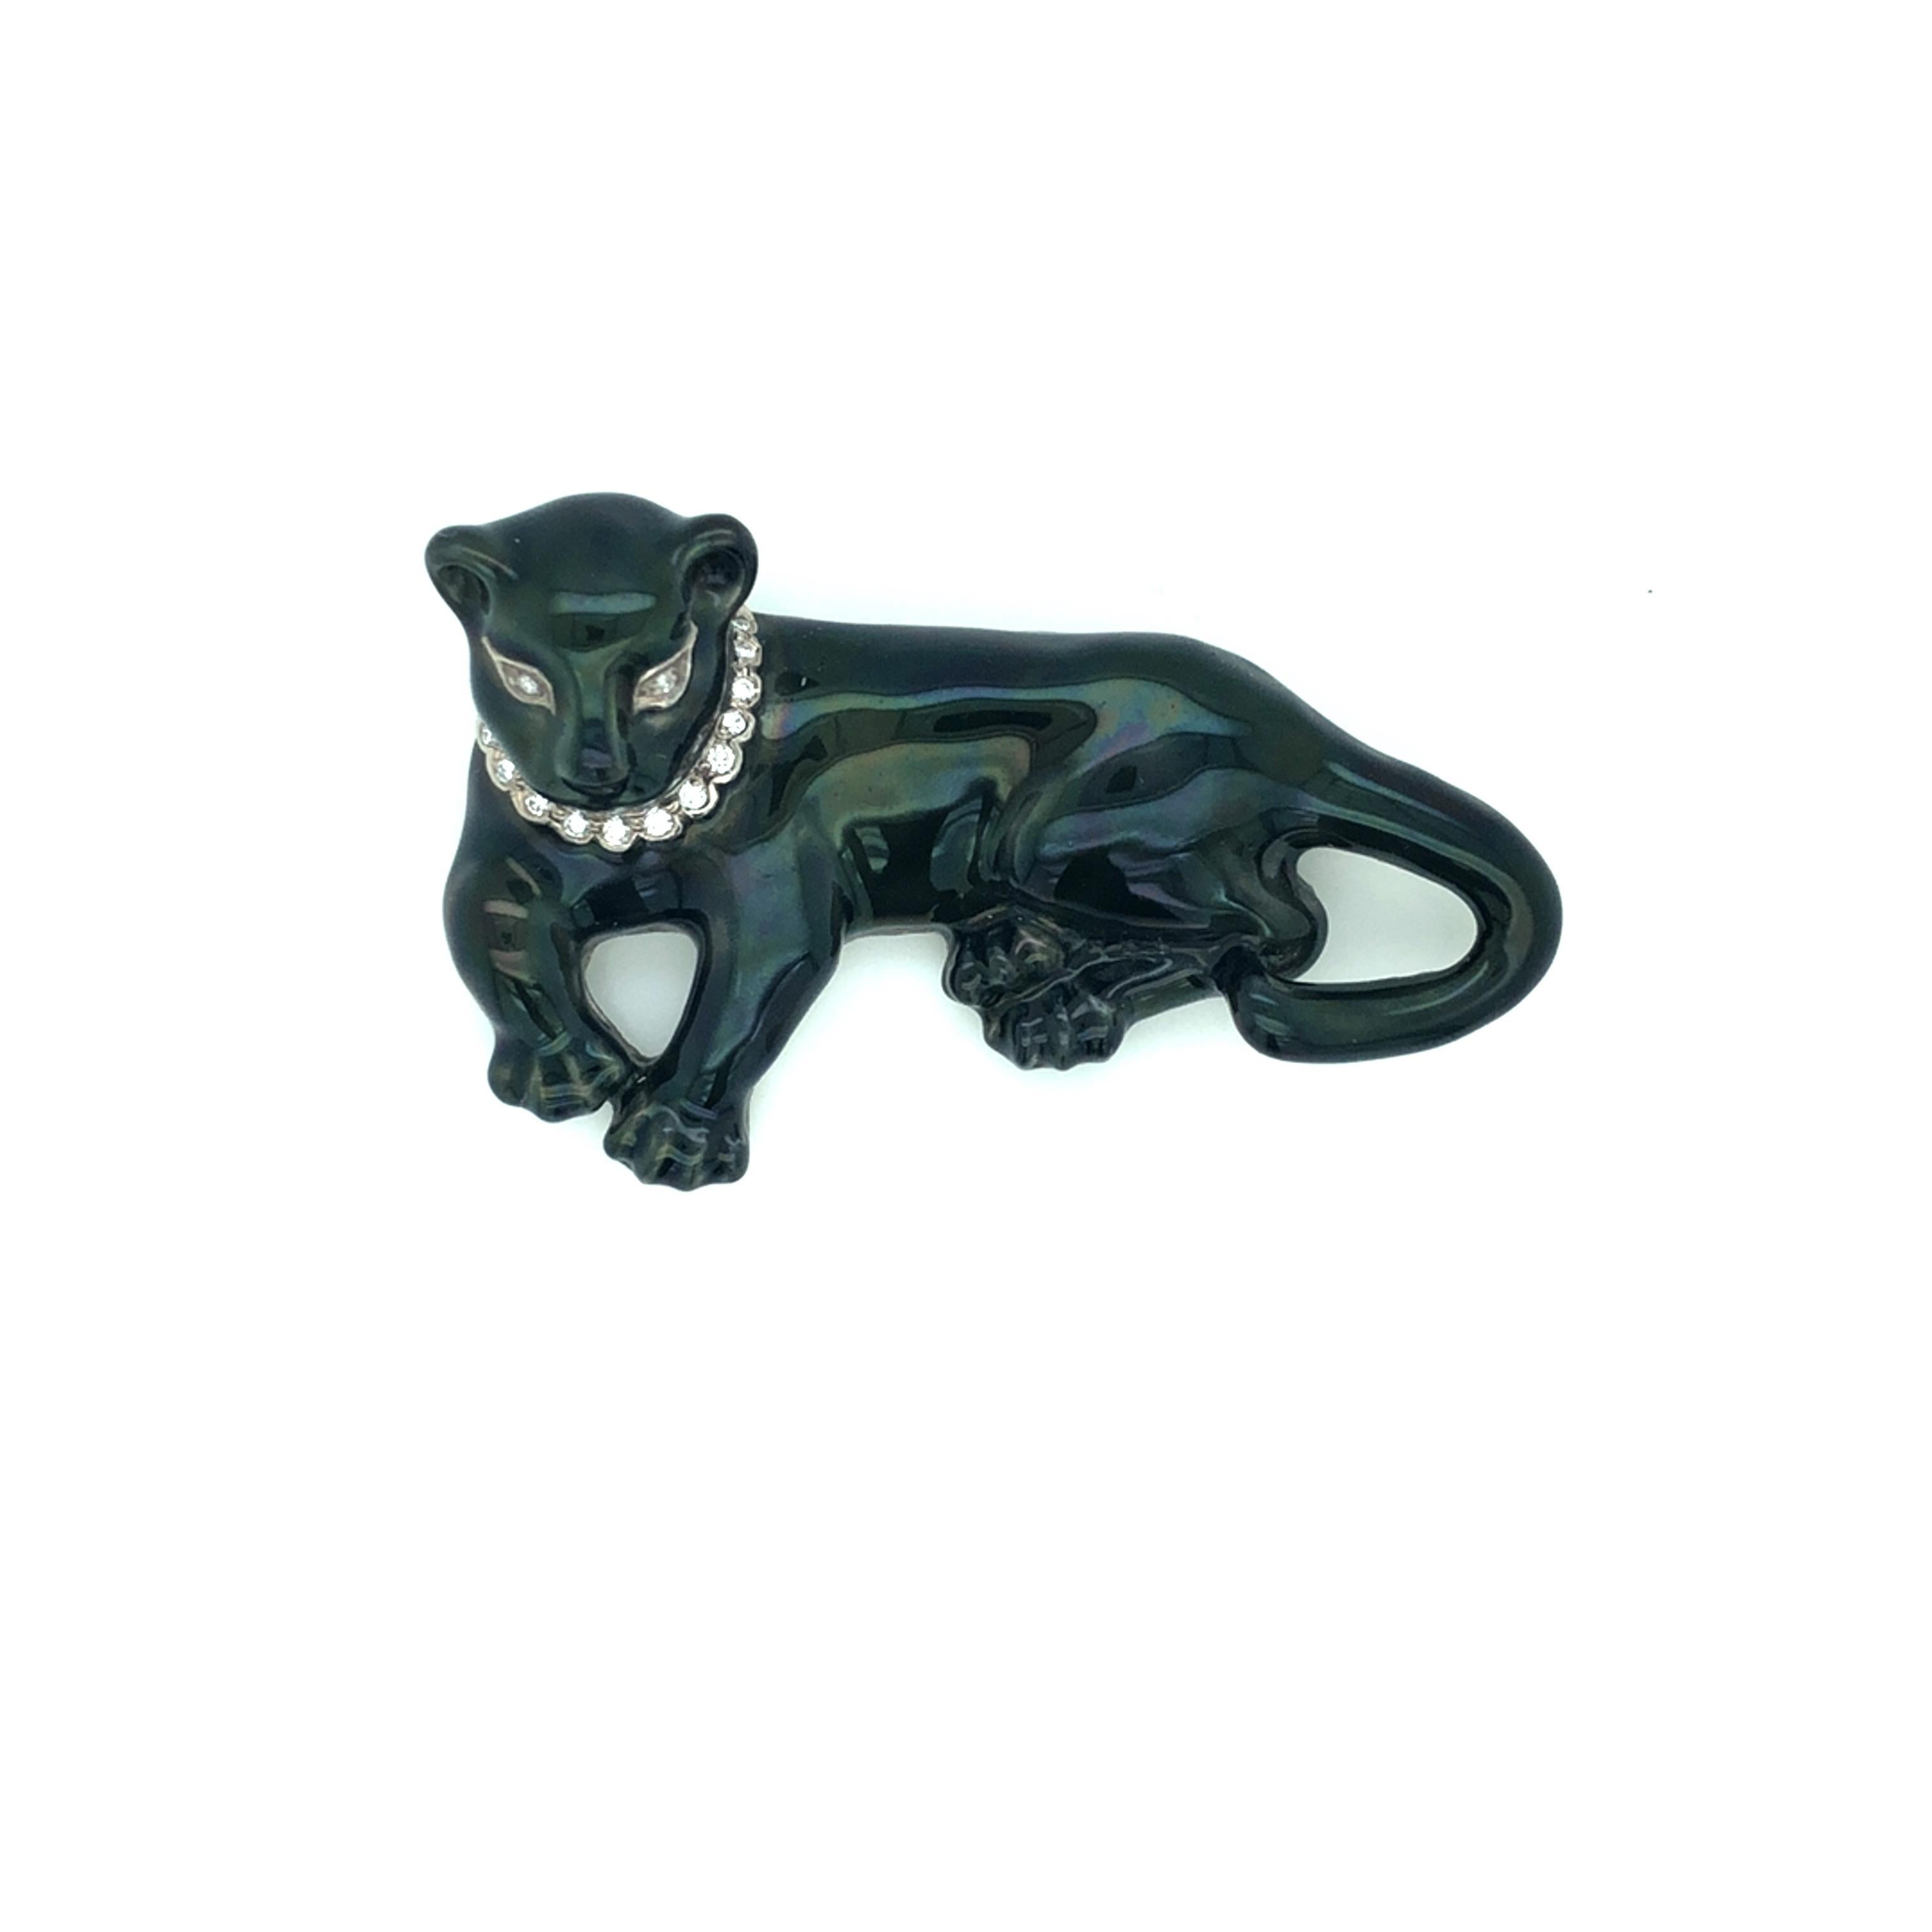 Oscar Heyman 18k white gold black enamel panther brooch wears a diamond collar and has diamond eyes, weighing a total of 0.12tcw. It is stamped with the makers mark, 18K, and serial number 200719. 

The brooch measures 55mm in length, 33mm at widest